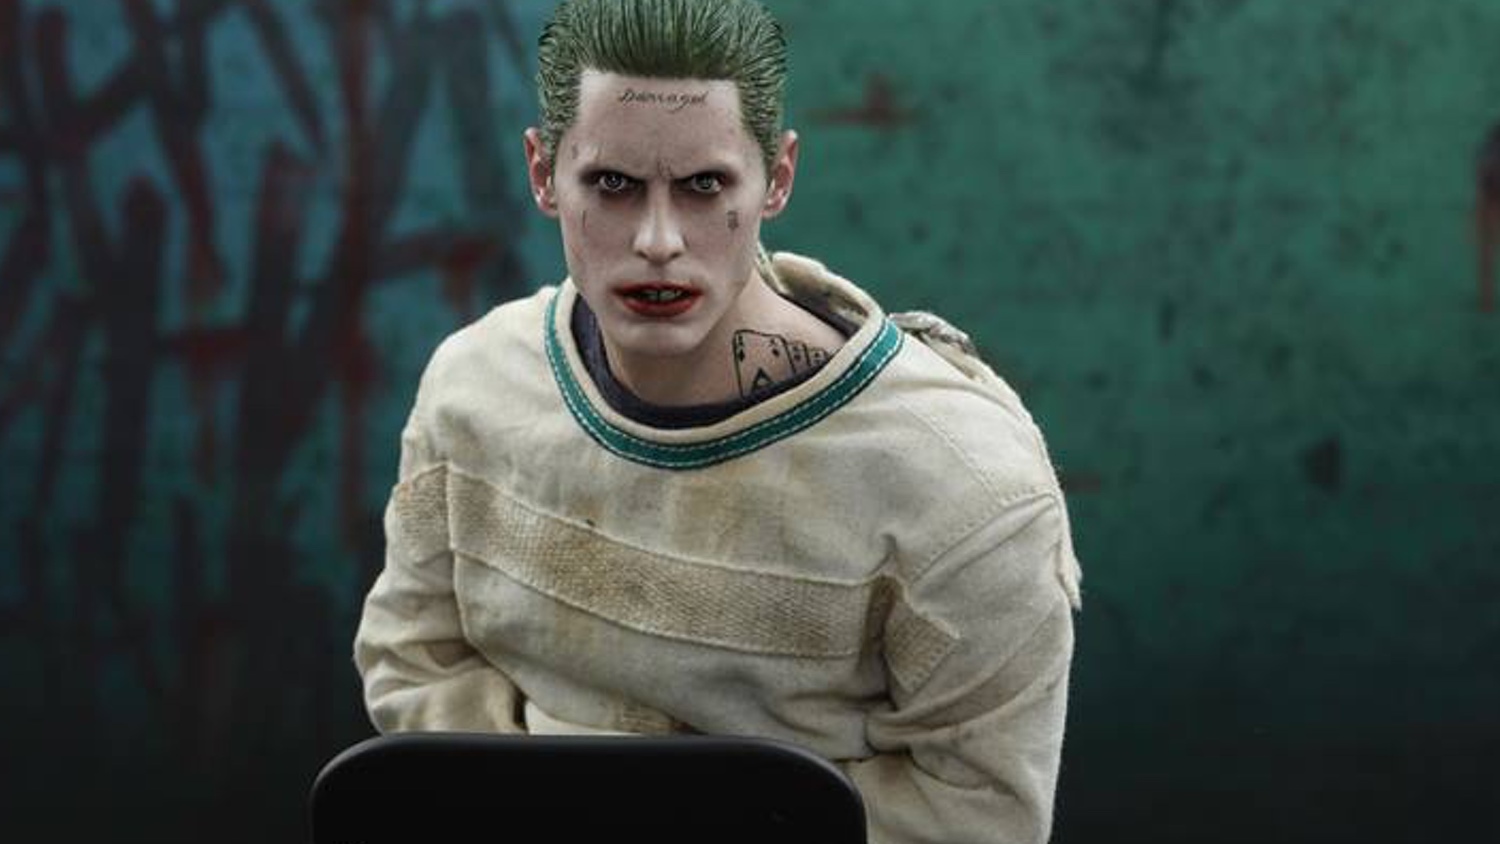 Hot Toys Reveals The Joker SUICIDE SQUAD Action Figure - GeekTyrant.